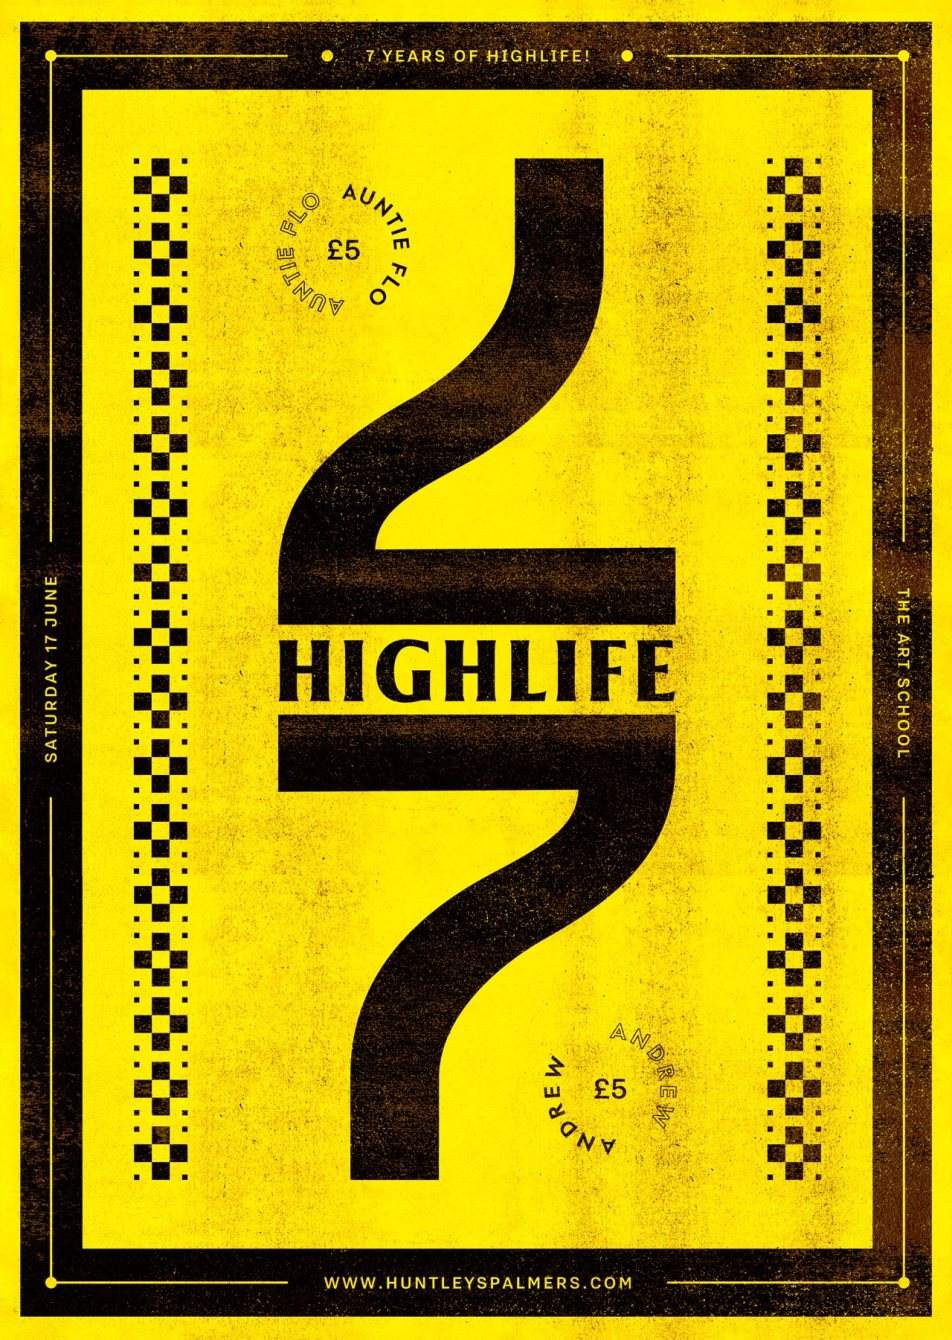 7 Years of Highlife with Auntie Flo + Andrew - Página frontal